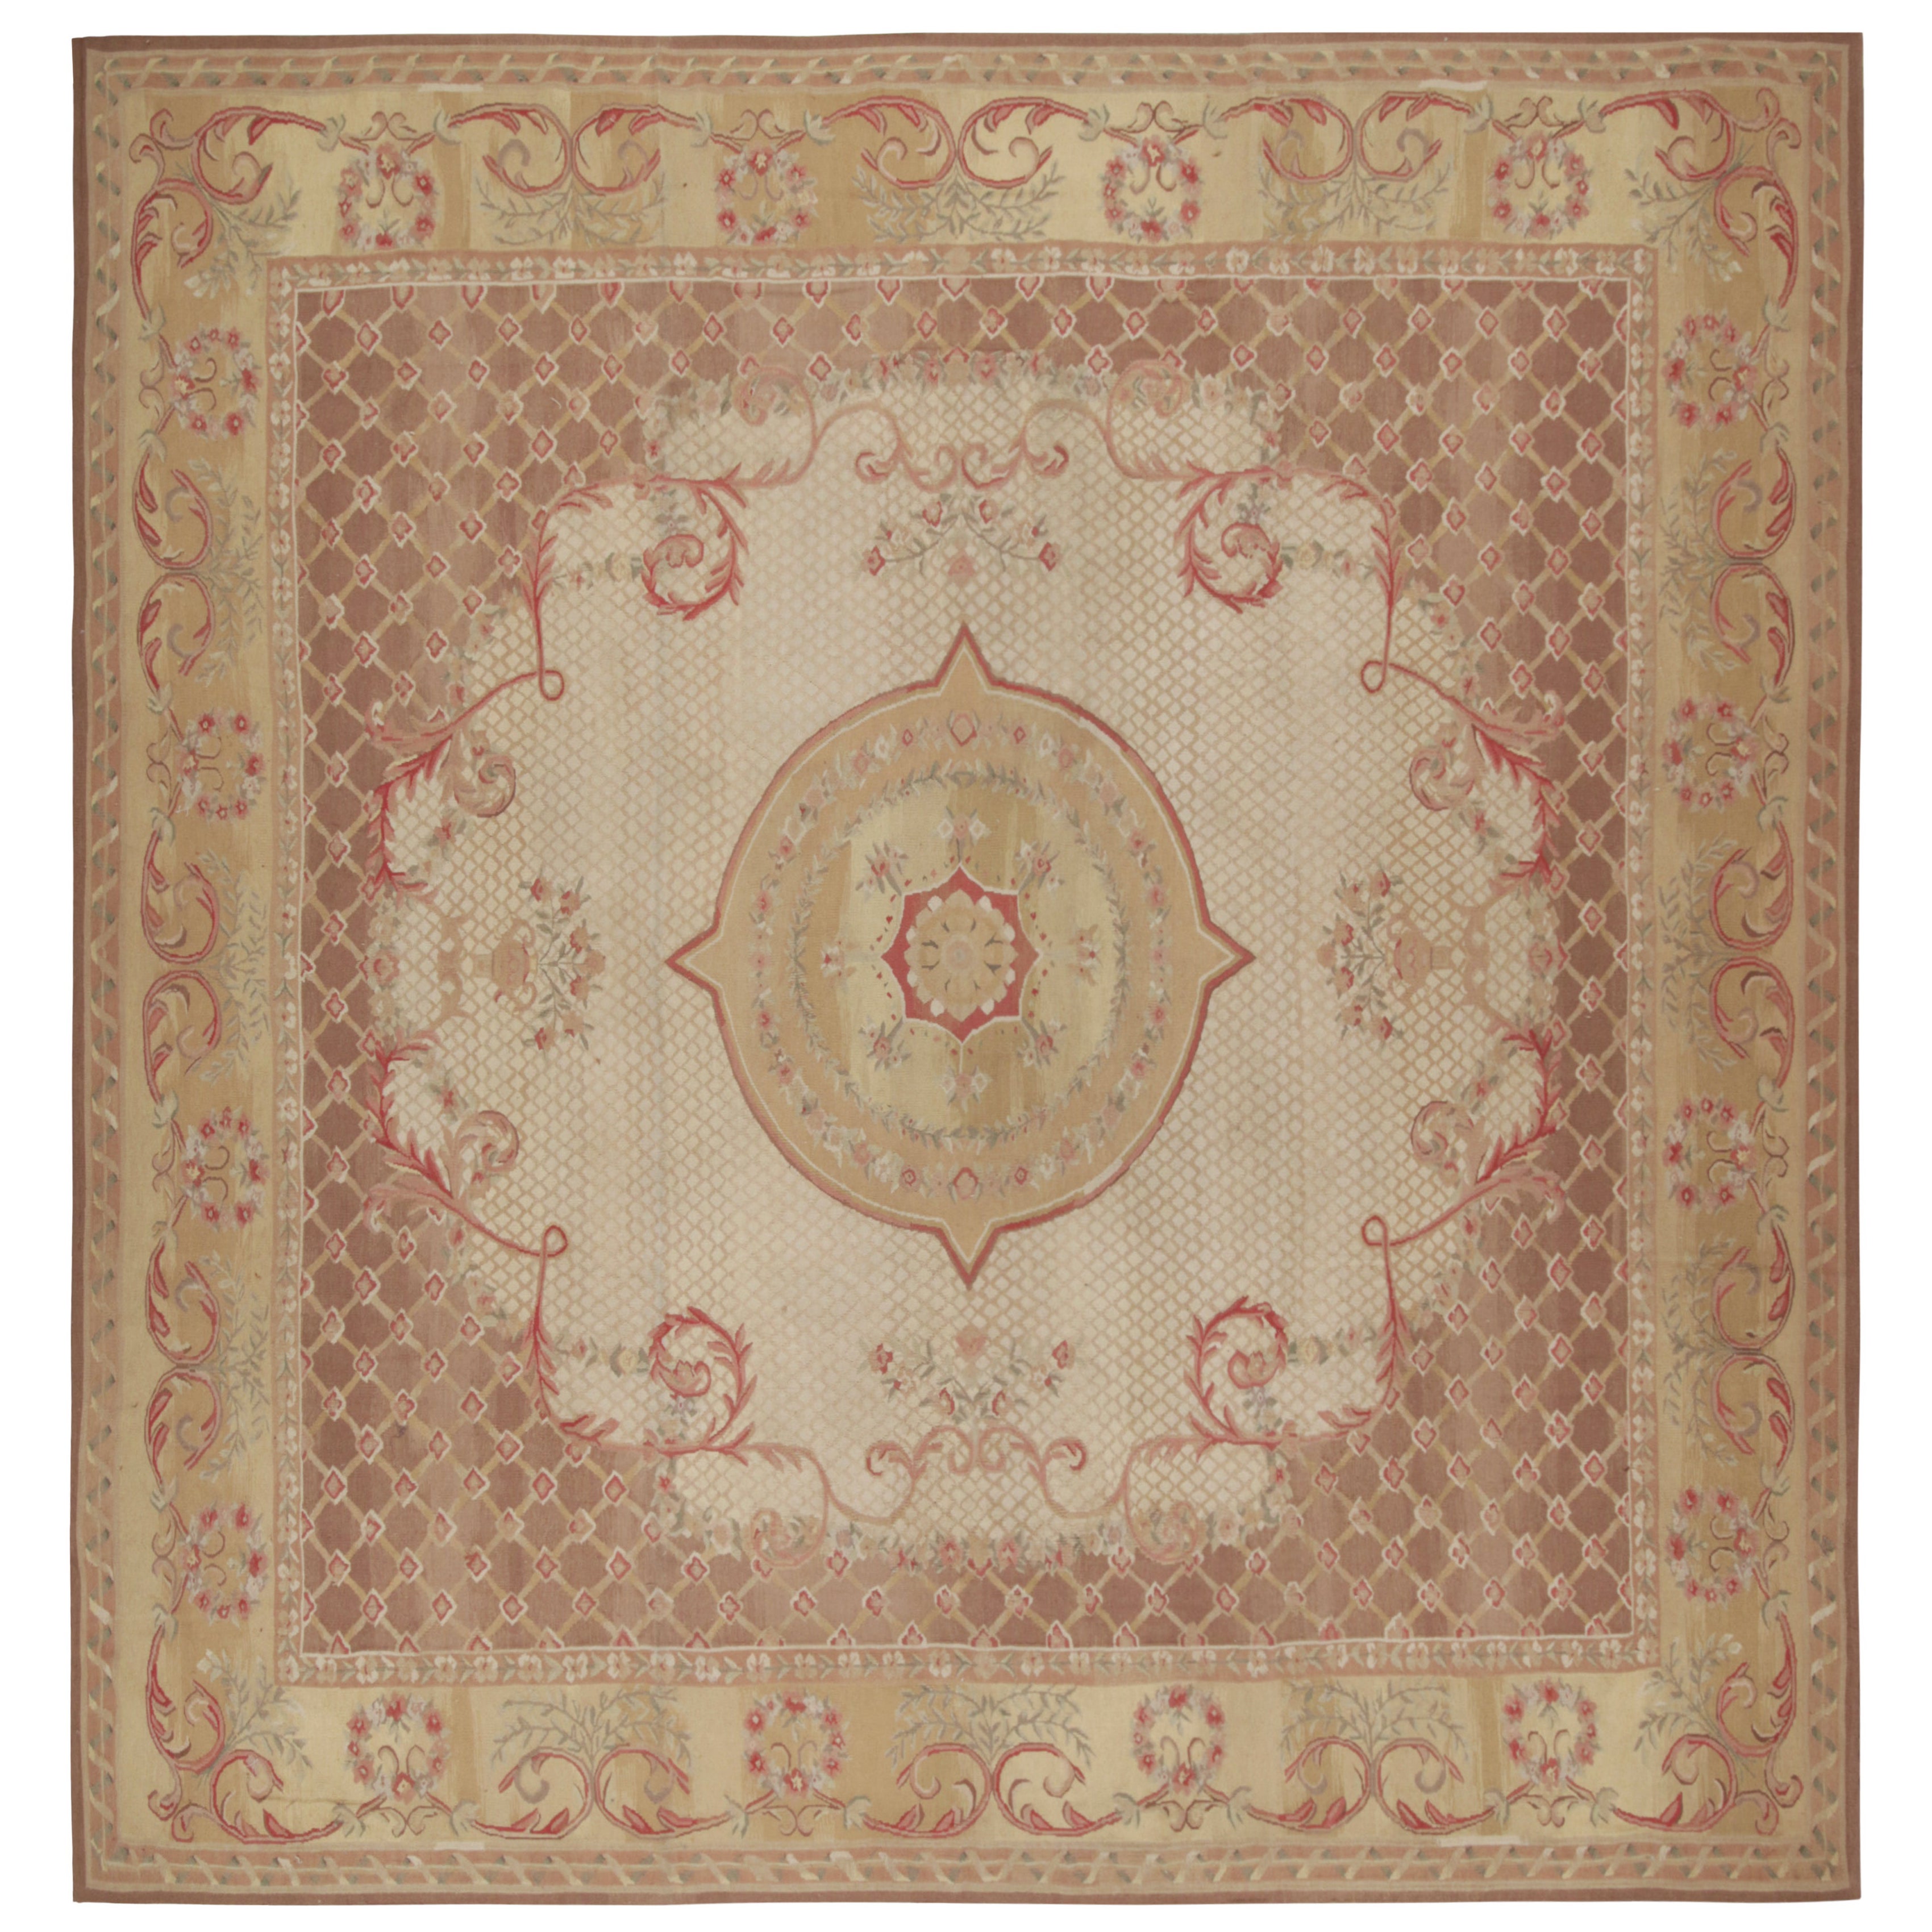 Rug & Kilim’s Aubusson Flatweave Style Rug with Beige Floral Medallion